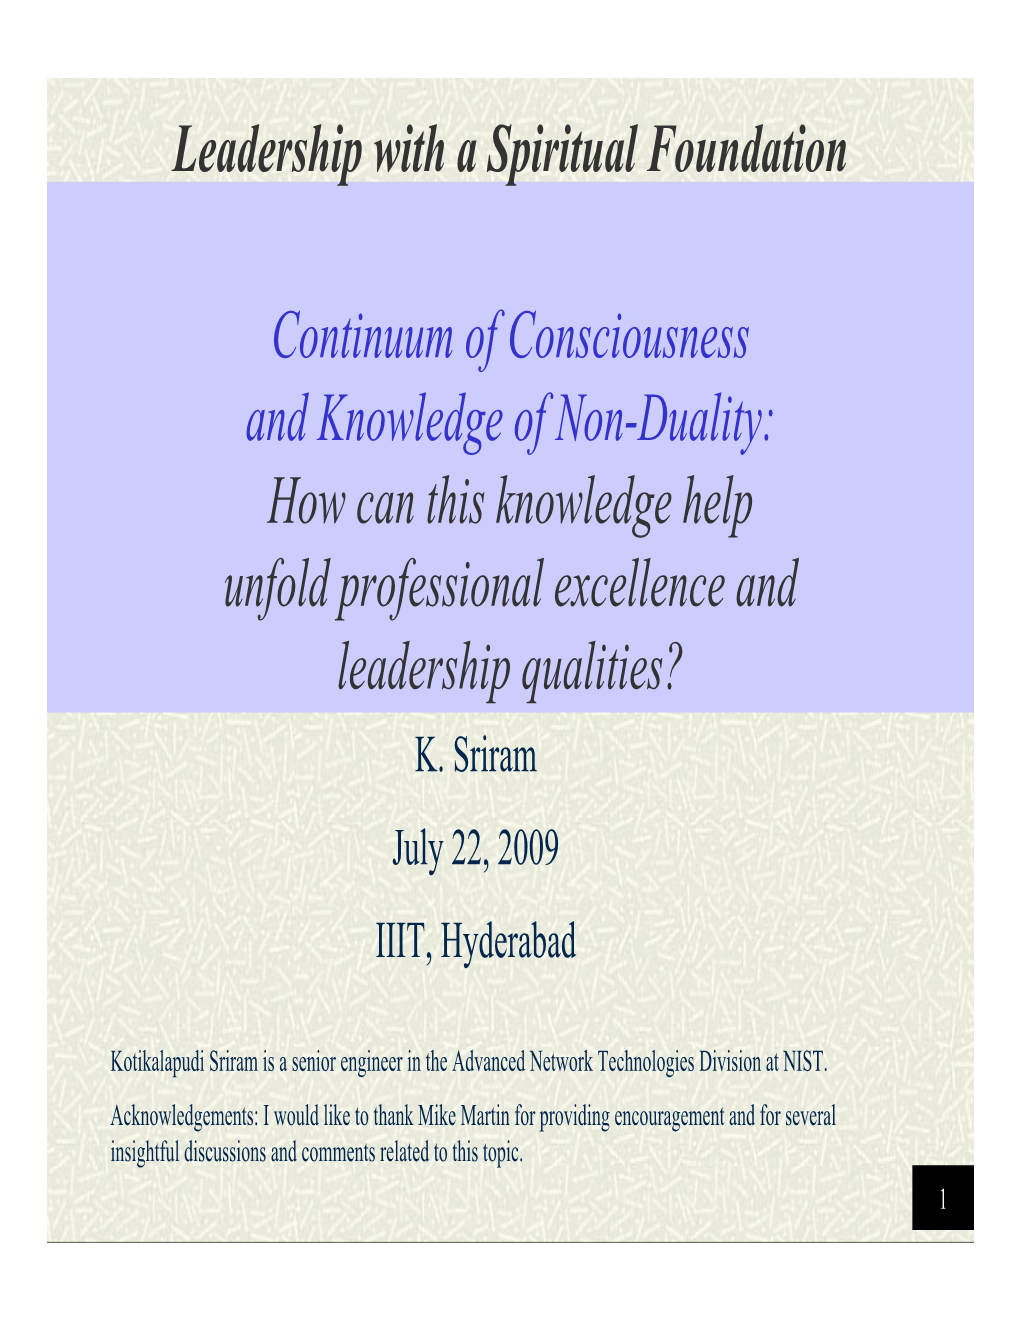 Leadership with a Spiritual Foundation Continuum of Consciousness and Knowledge of Non-Duality